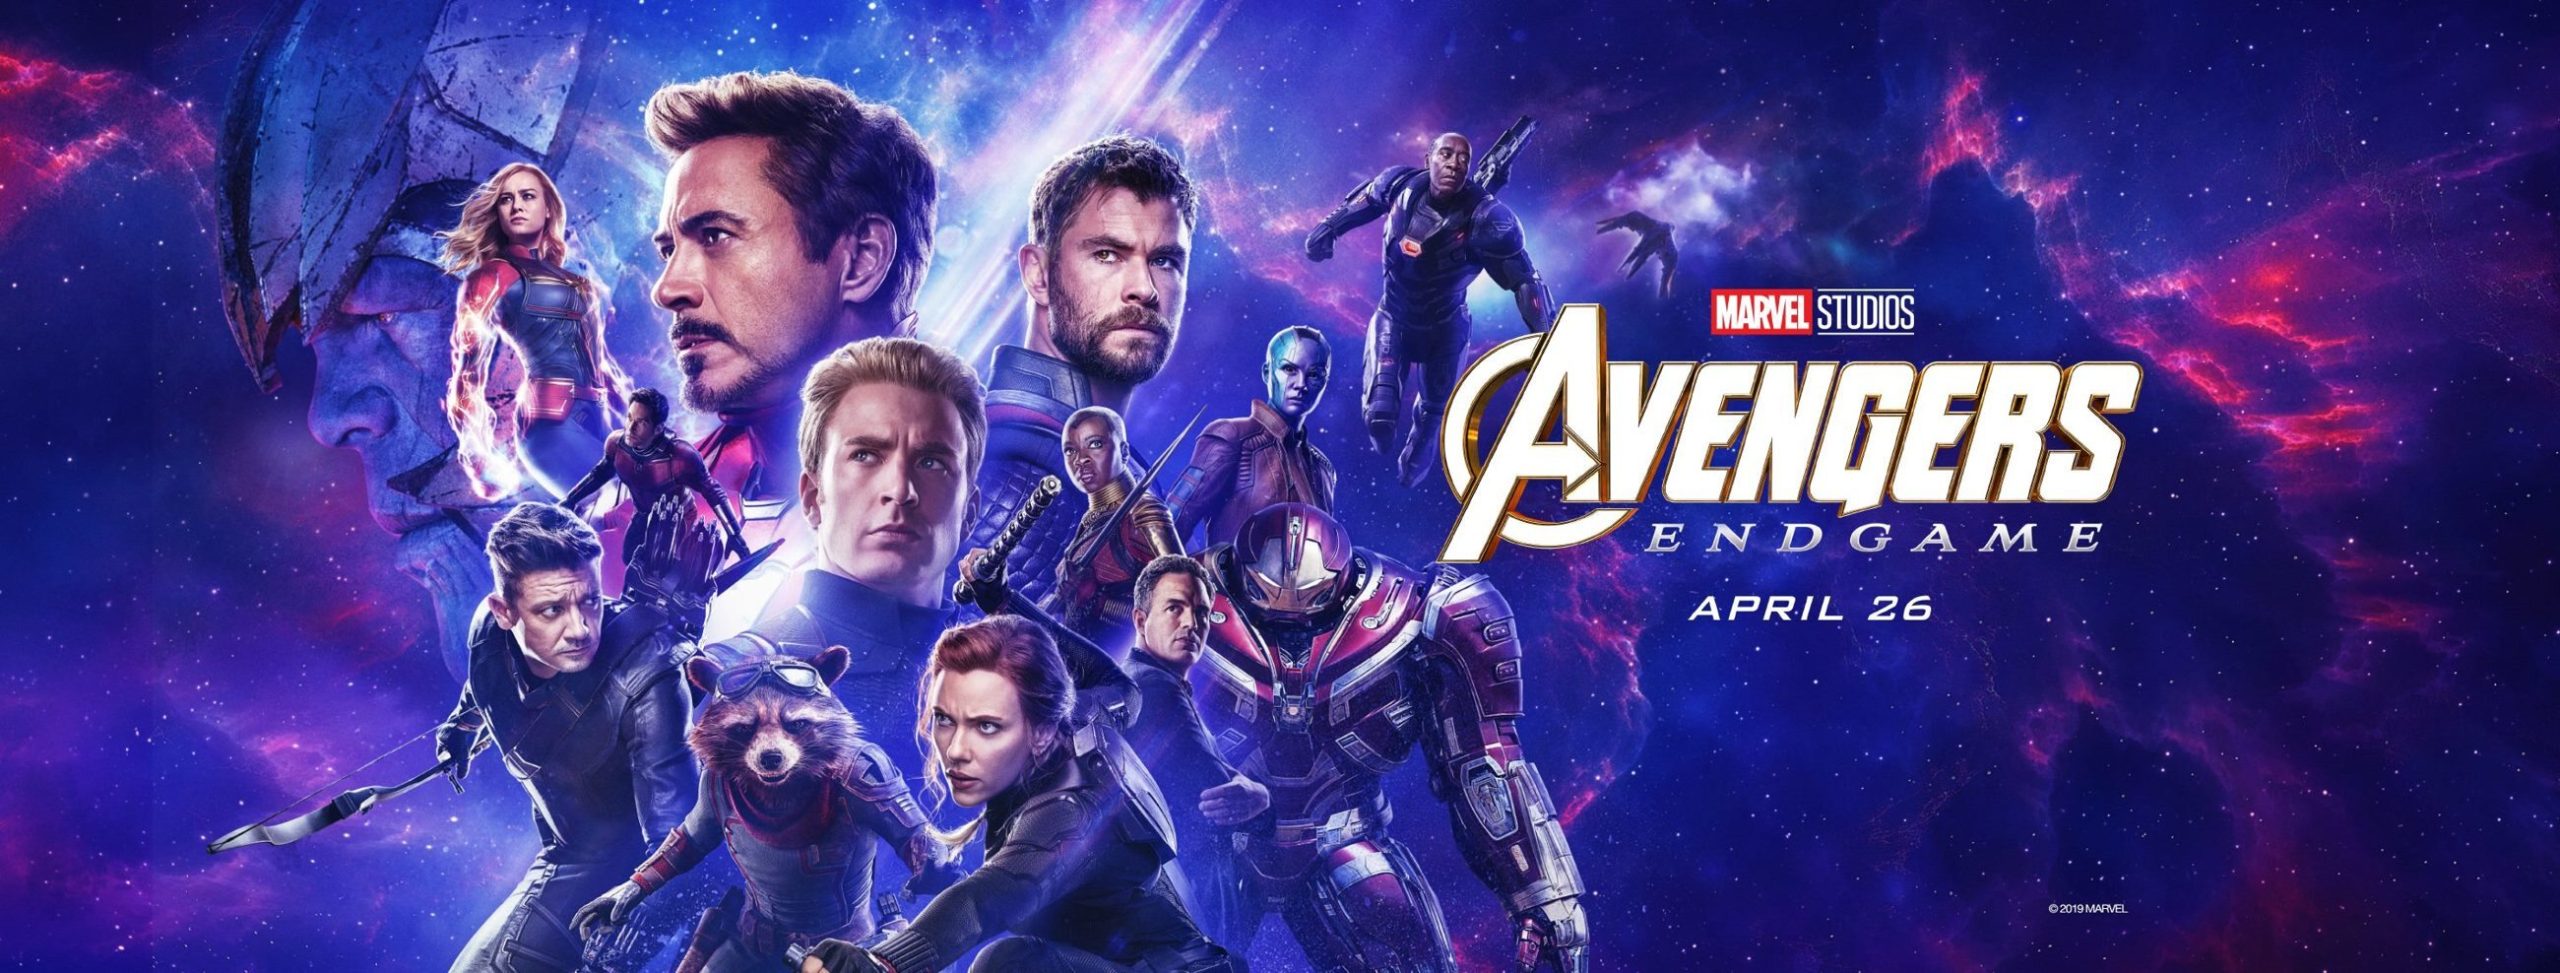 "Avengers: Endgame" as bait in the hands of criminals.  Can you believe people fall for this?